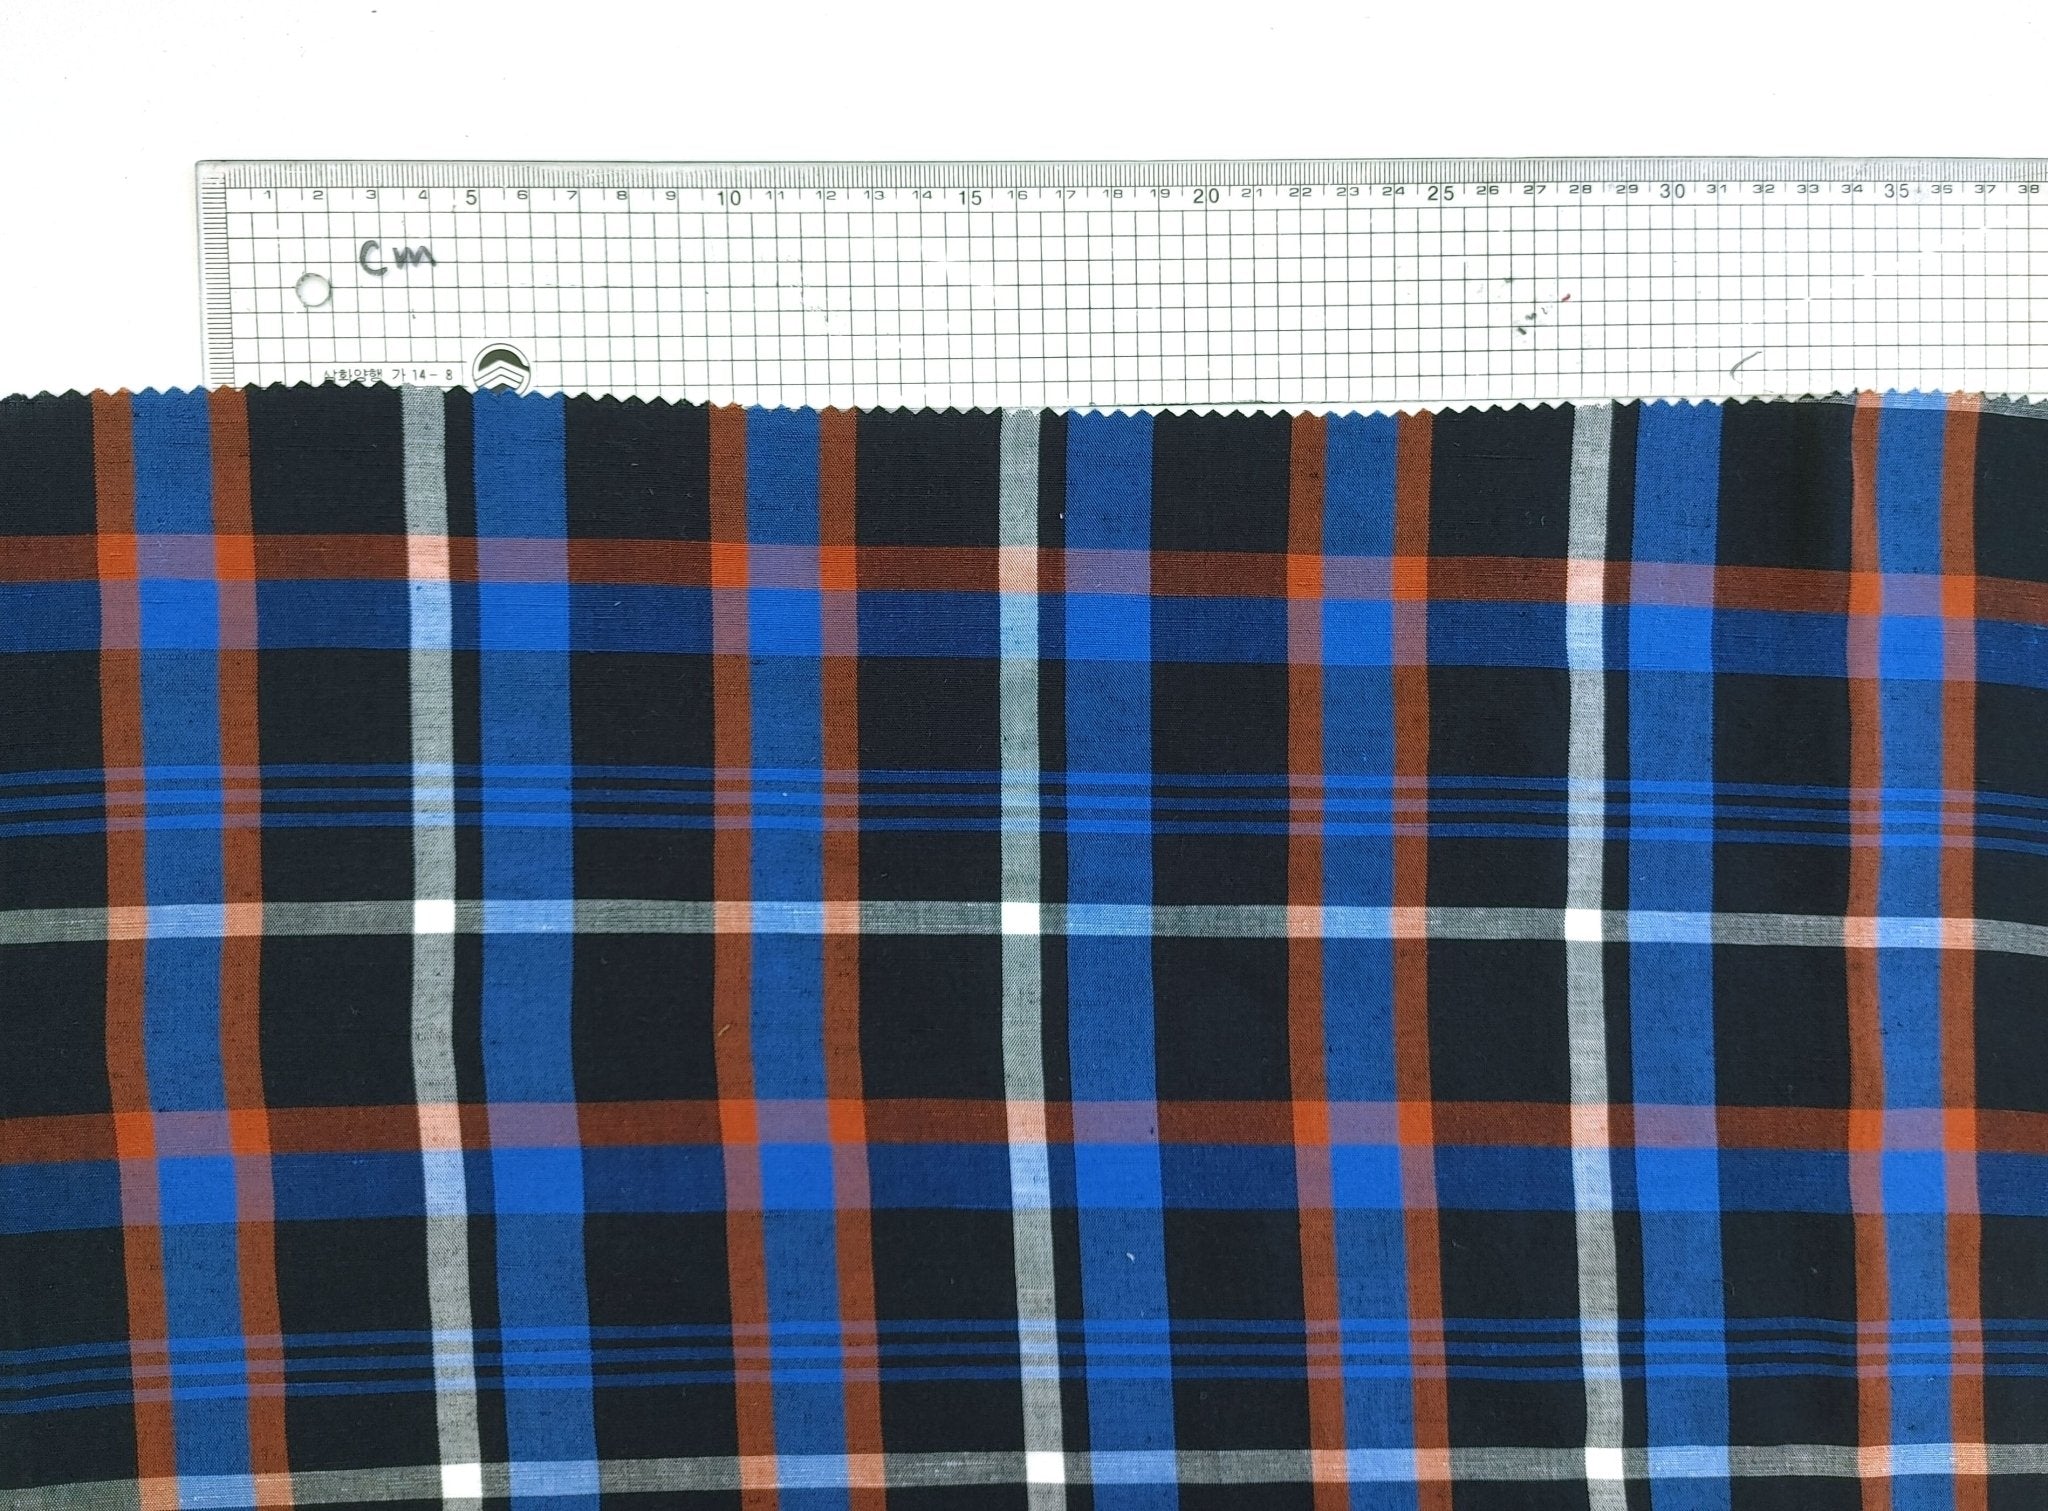 Timeless Plaid: Linen Tencel Blend Fabric with Plaid Pattern 7185 - The Linen Lab - Navy